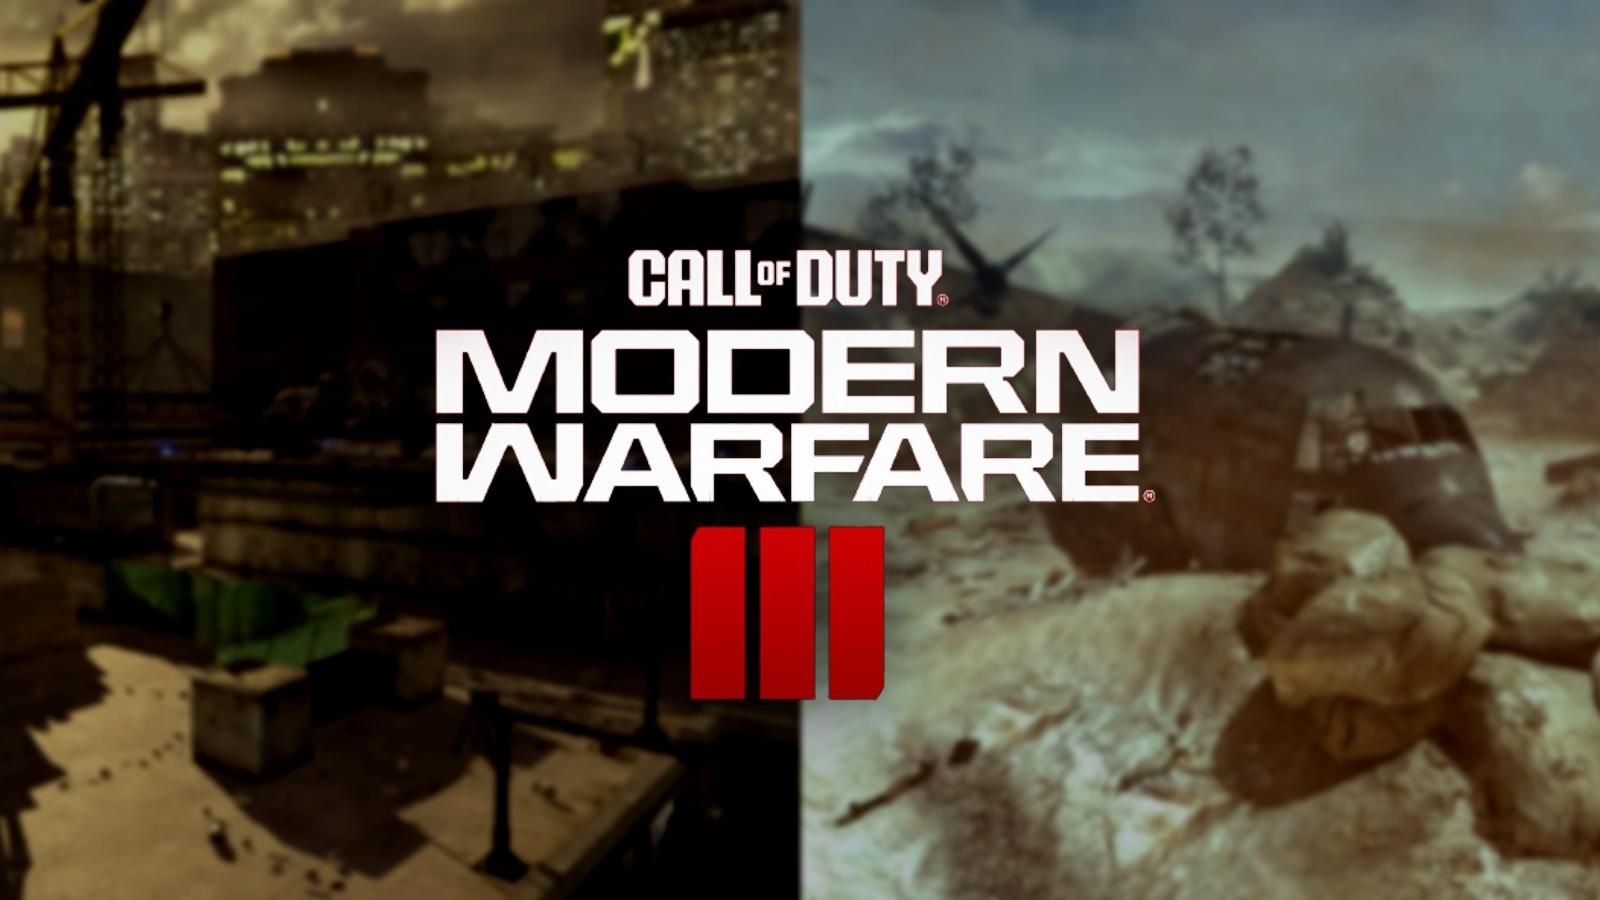 Call of Duty Modern Warfare 3 Full Game Release Times Confirmed - IGN